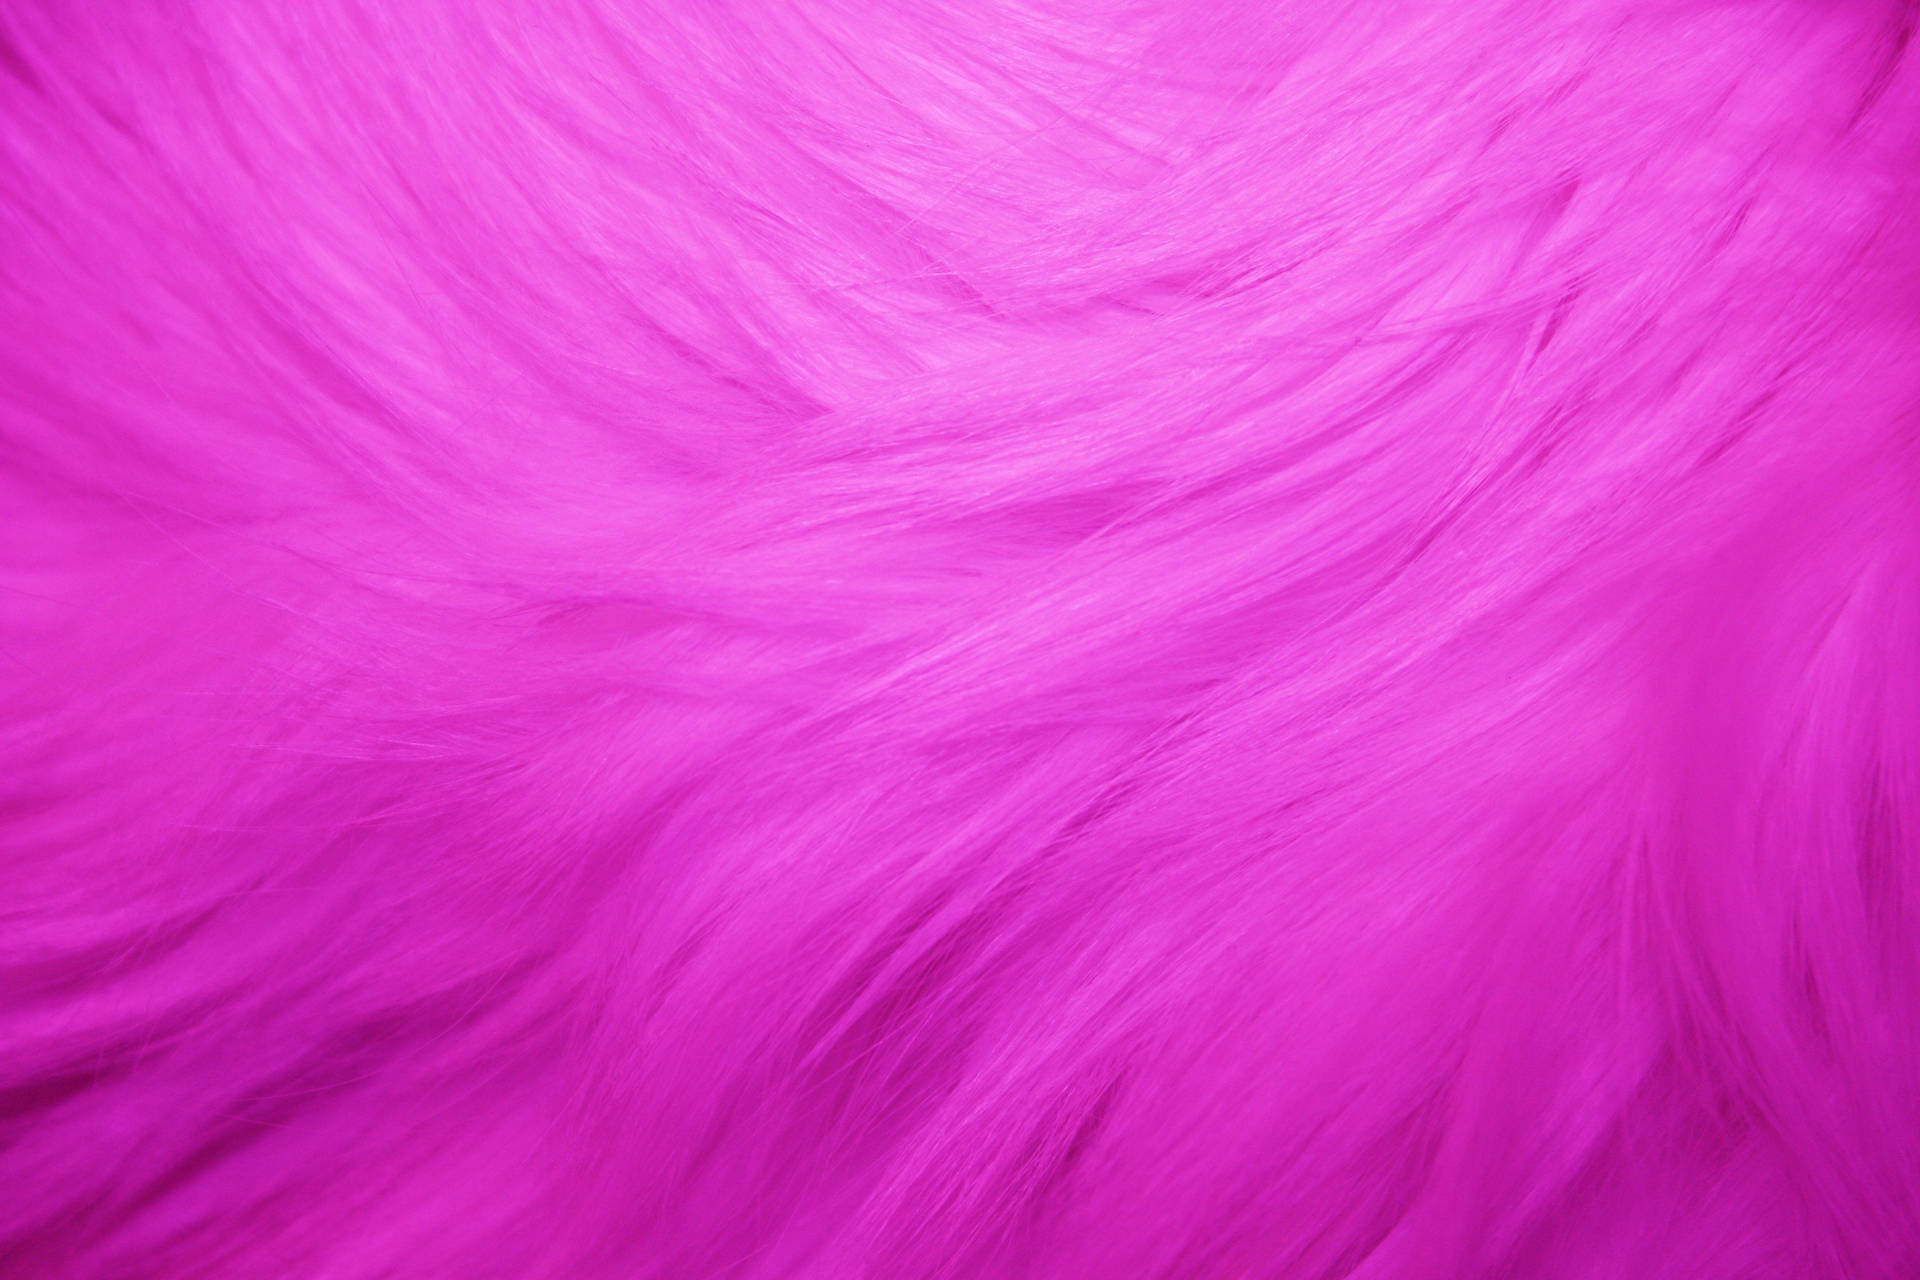 Adding a touch of luxury to your home with this beautiful and plush pink faux fur cushion. Wallpaper